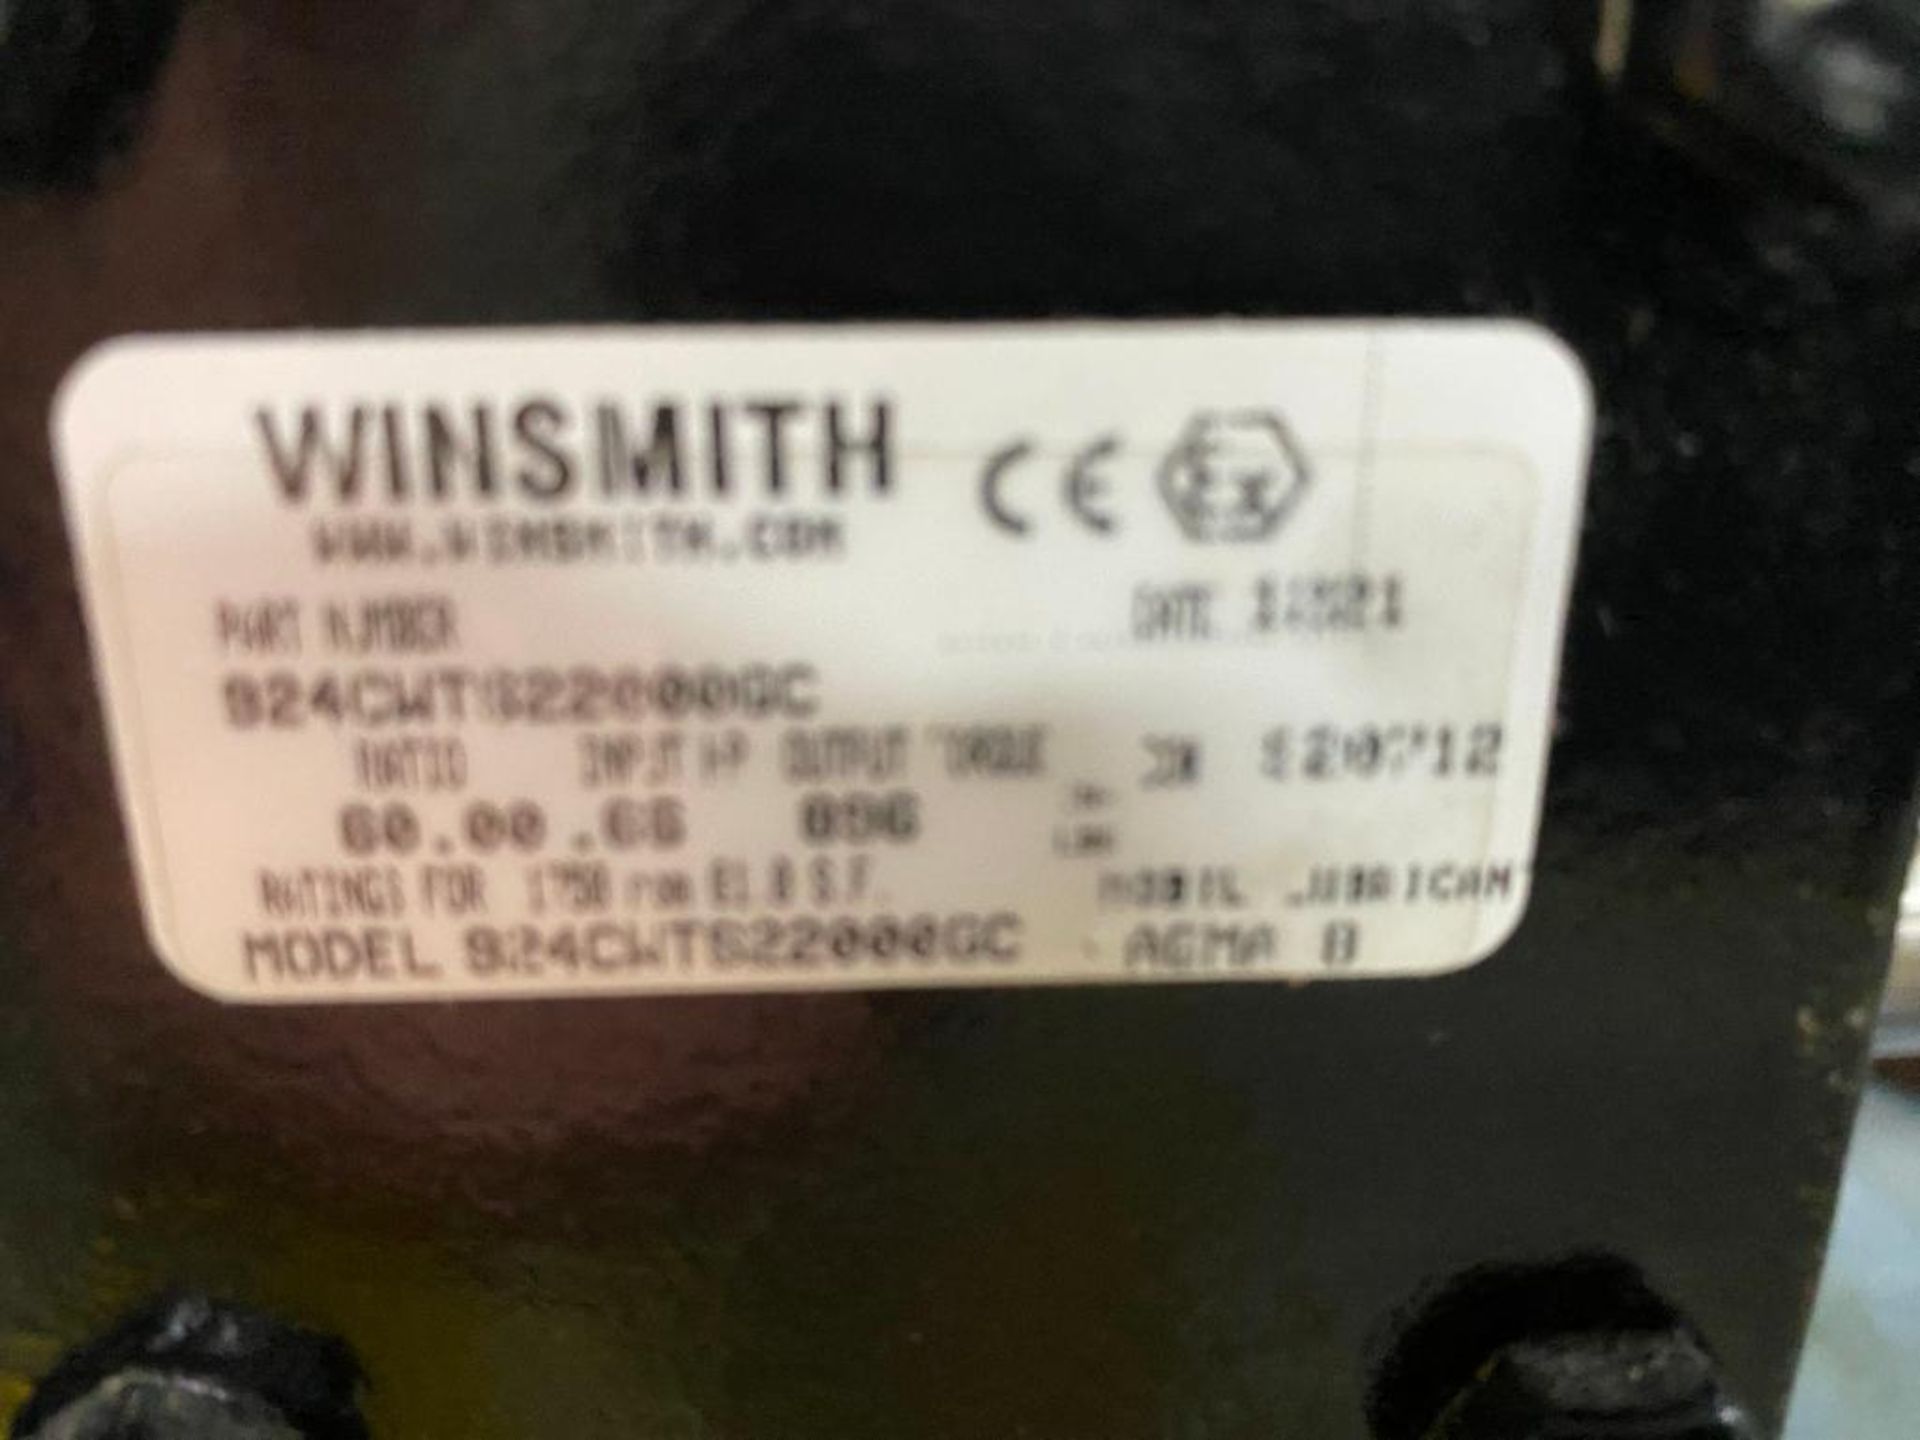 (2) Winsmith Speed Reducers, Part No. 924CWTS22000GC & 924CWT, Ratio: 60:66 & 30:1.23 - Image 2 of 2